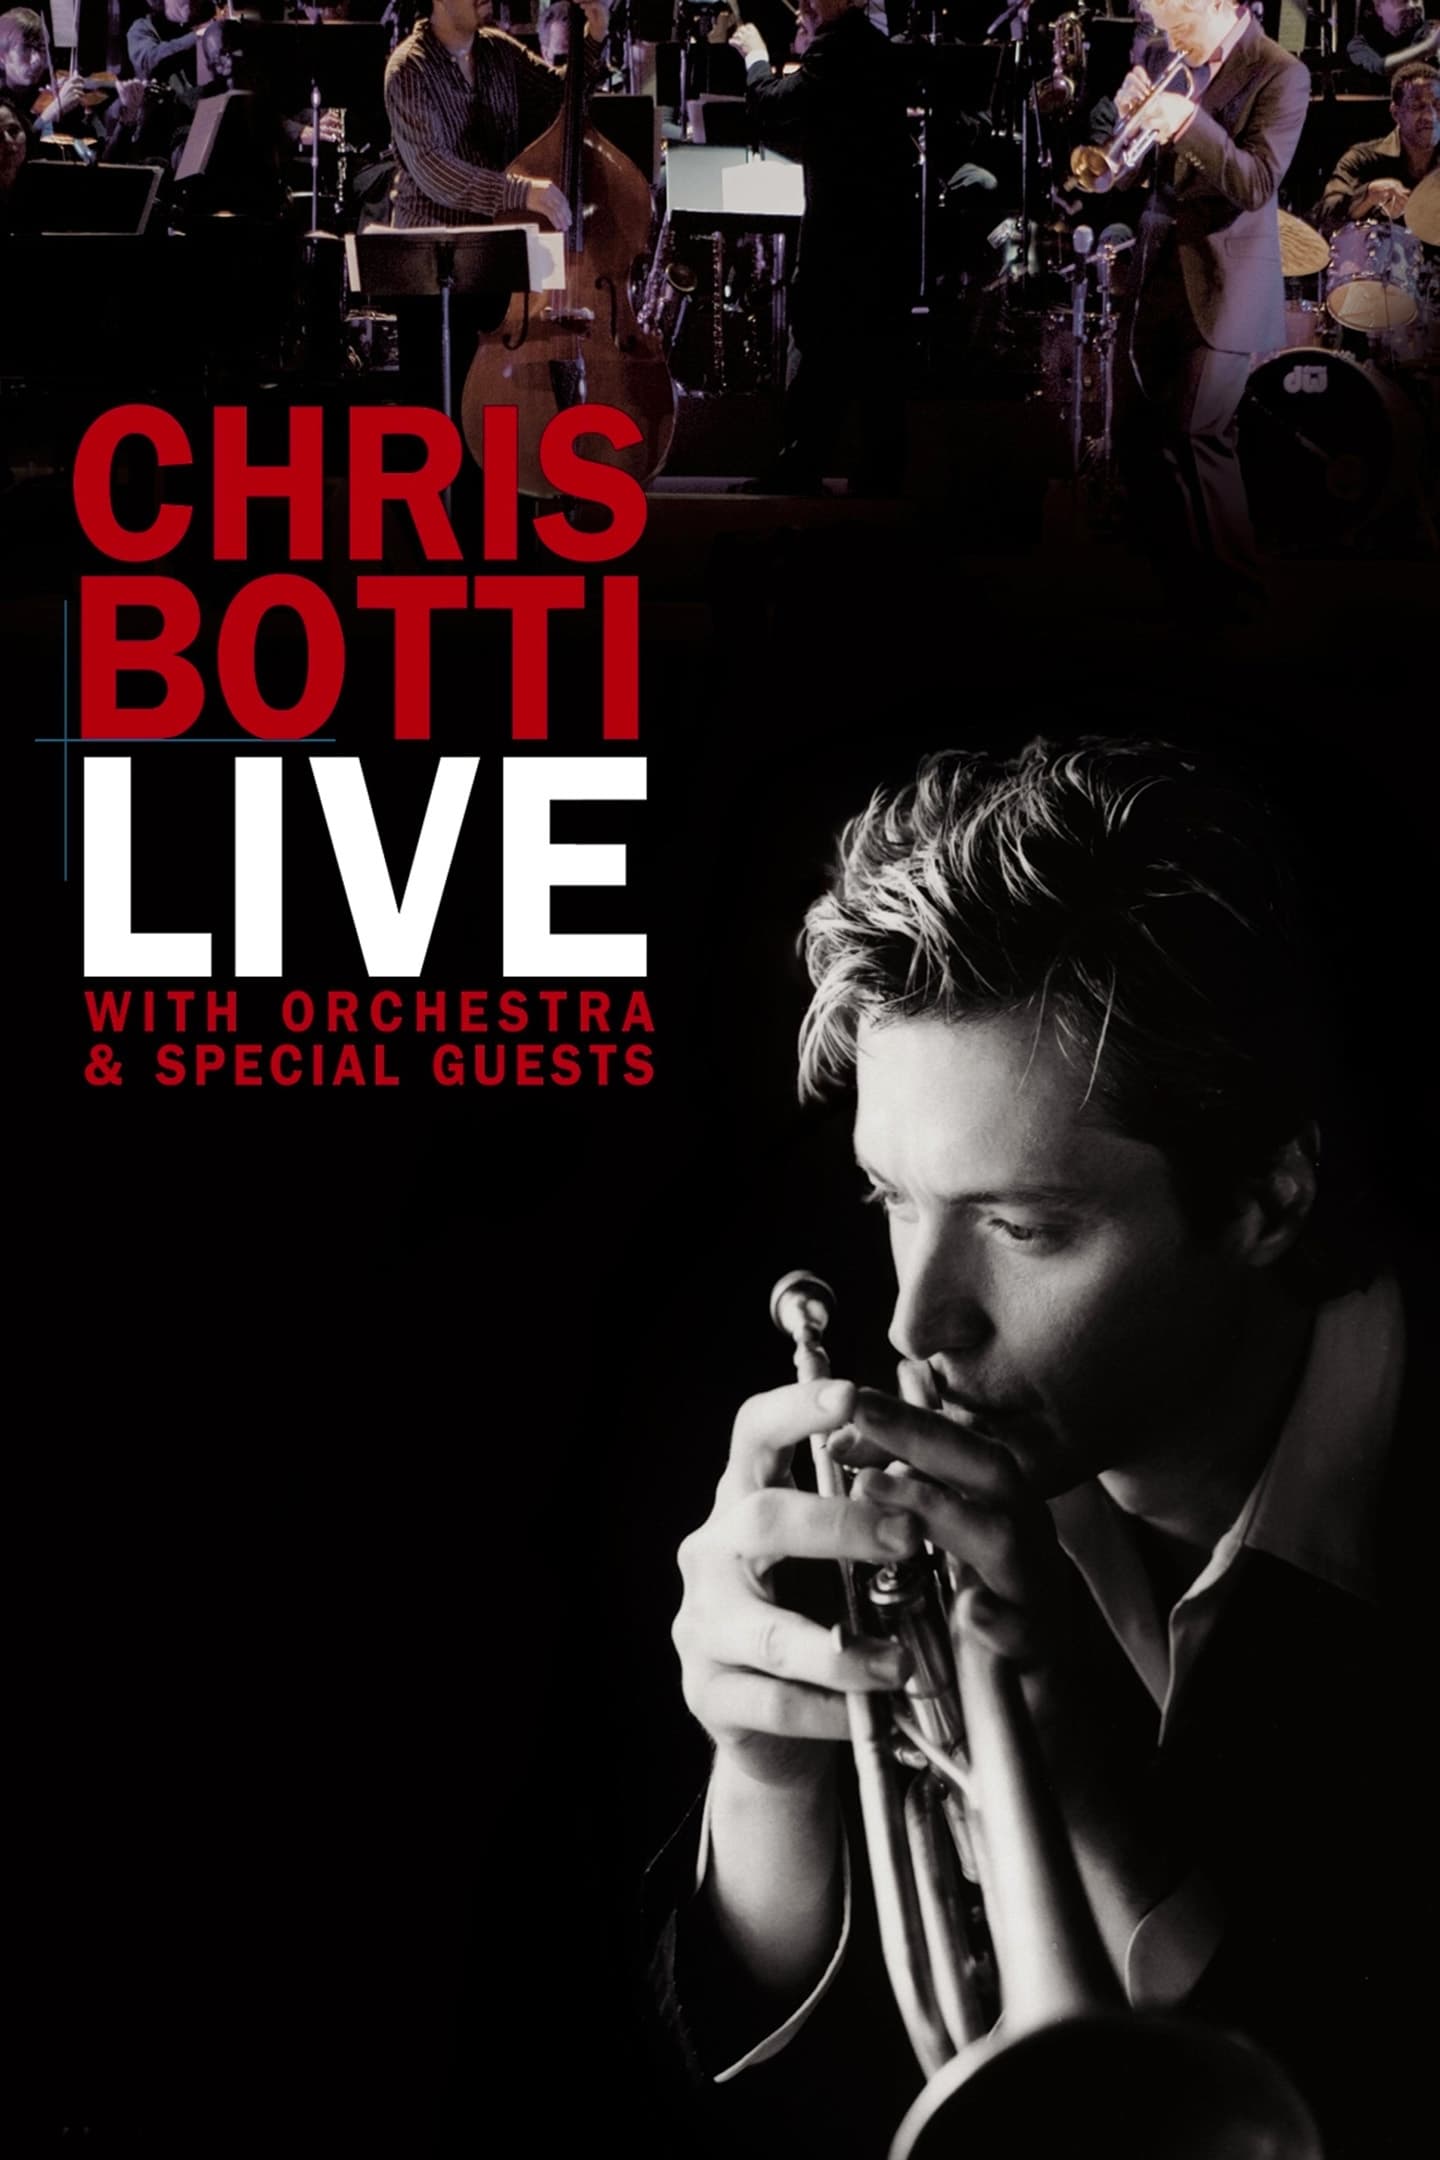 Chris Botti Live: With Orchestra and Special Guests (2006)